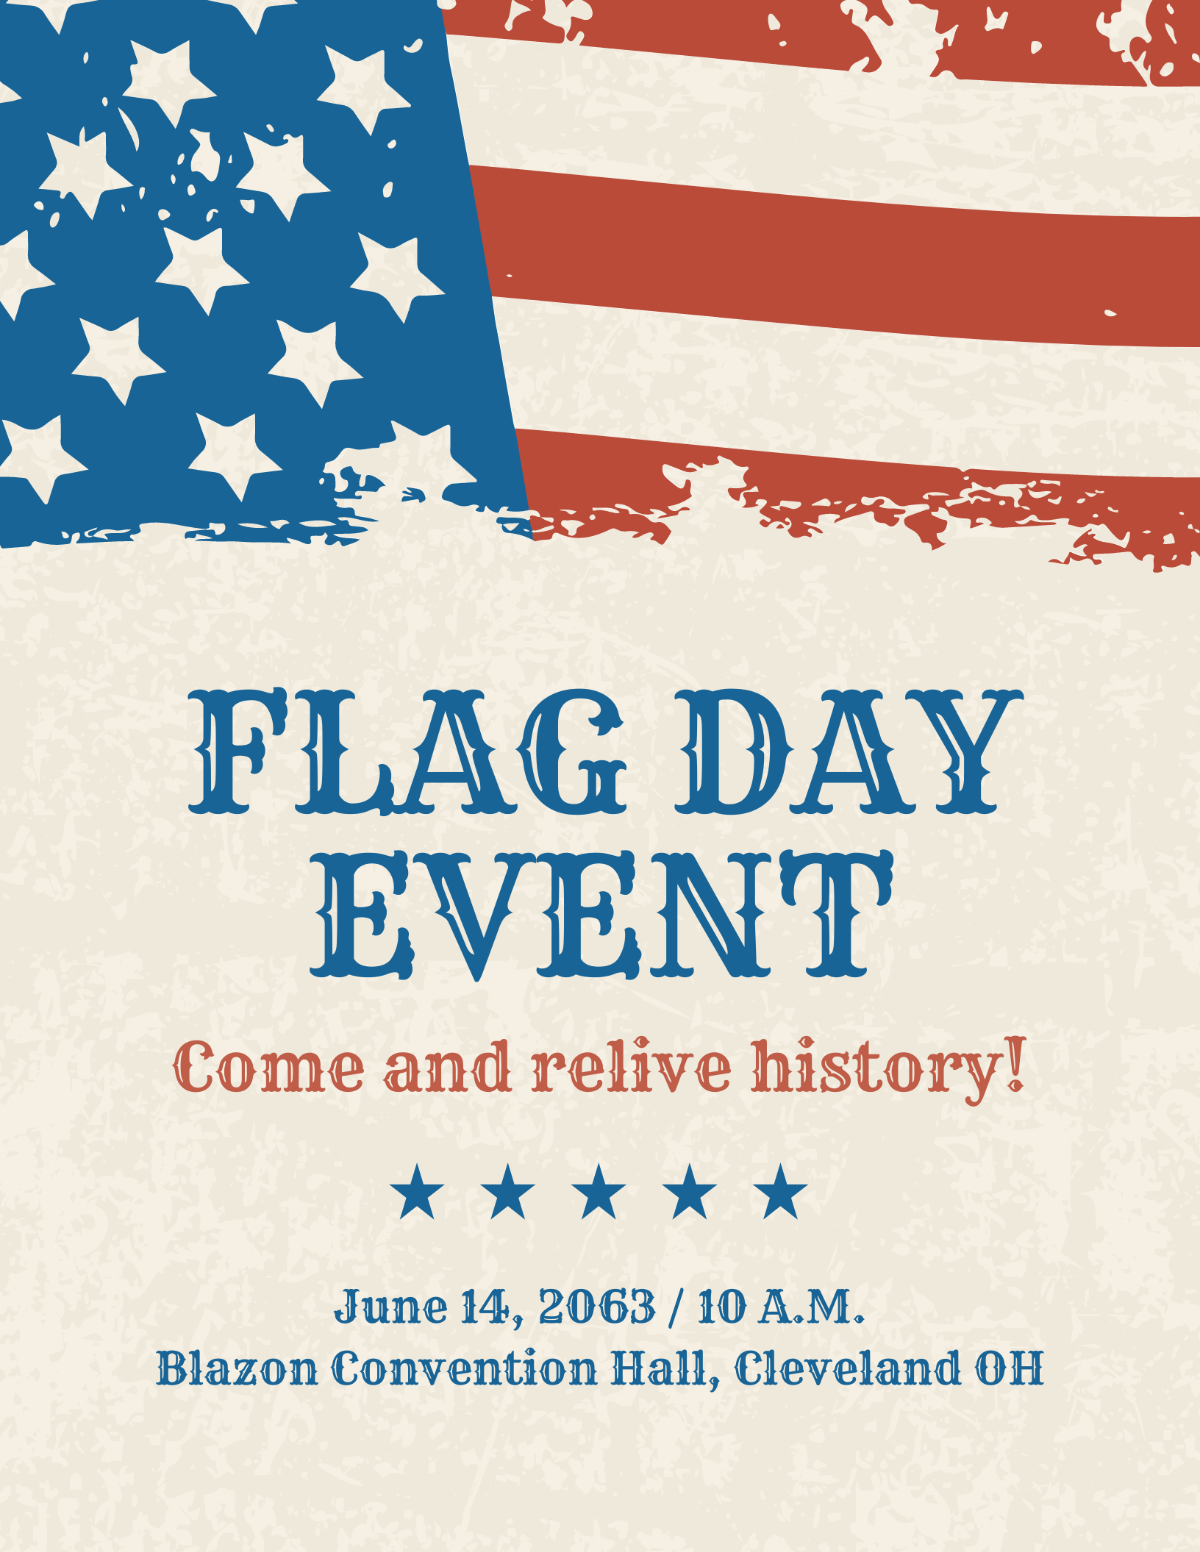 Free Retro Flag Day Flyer Template